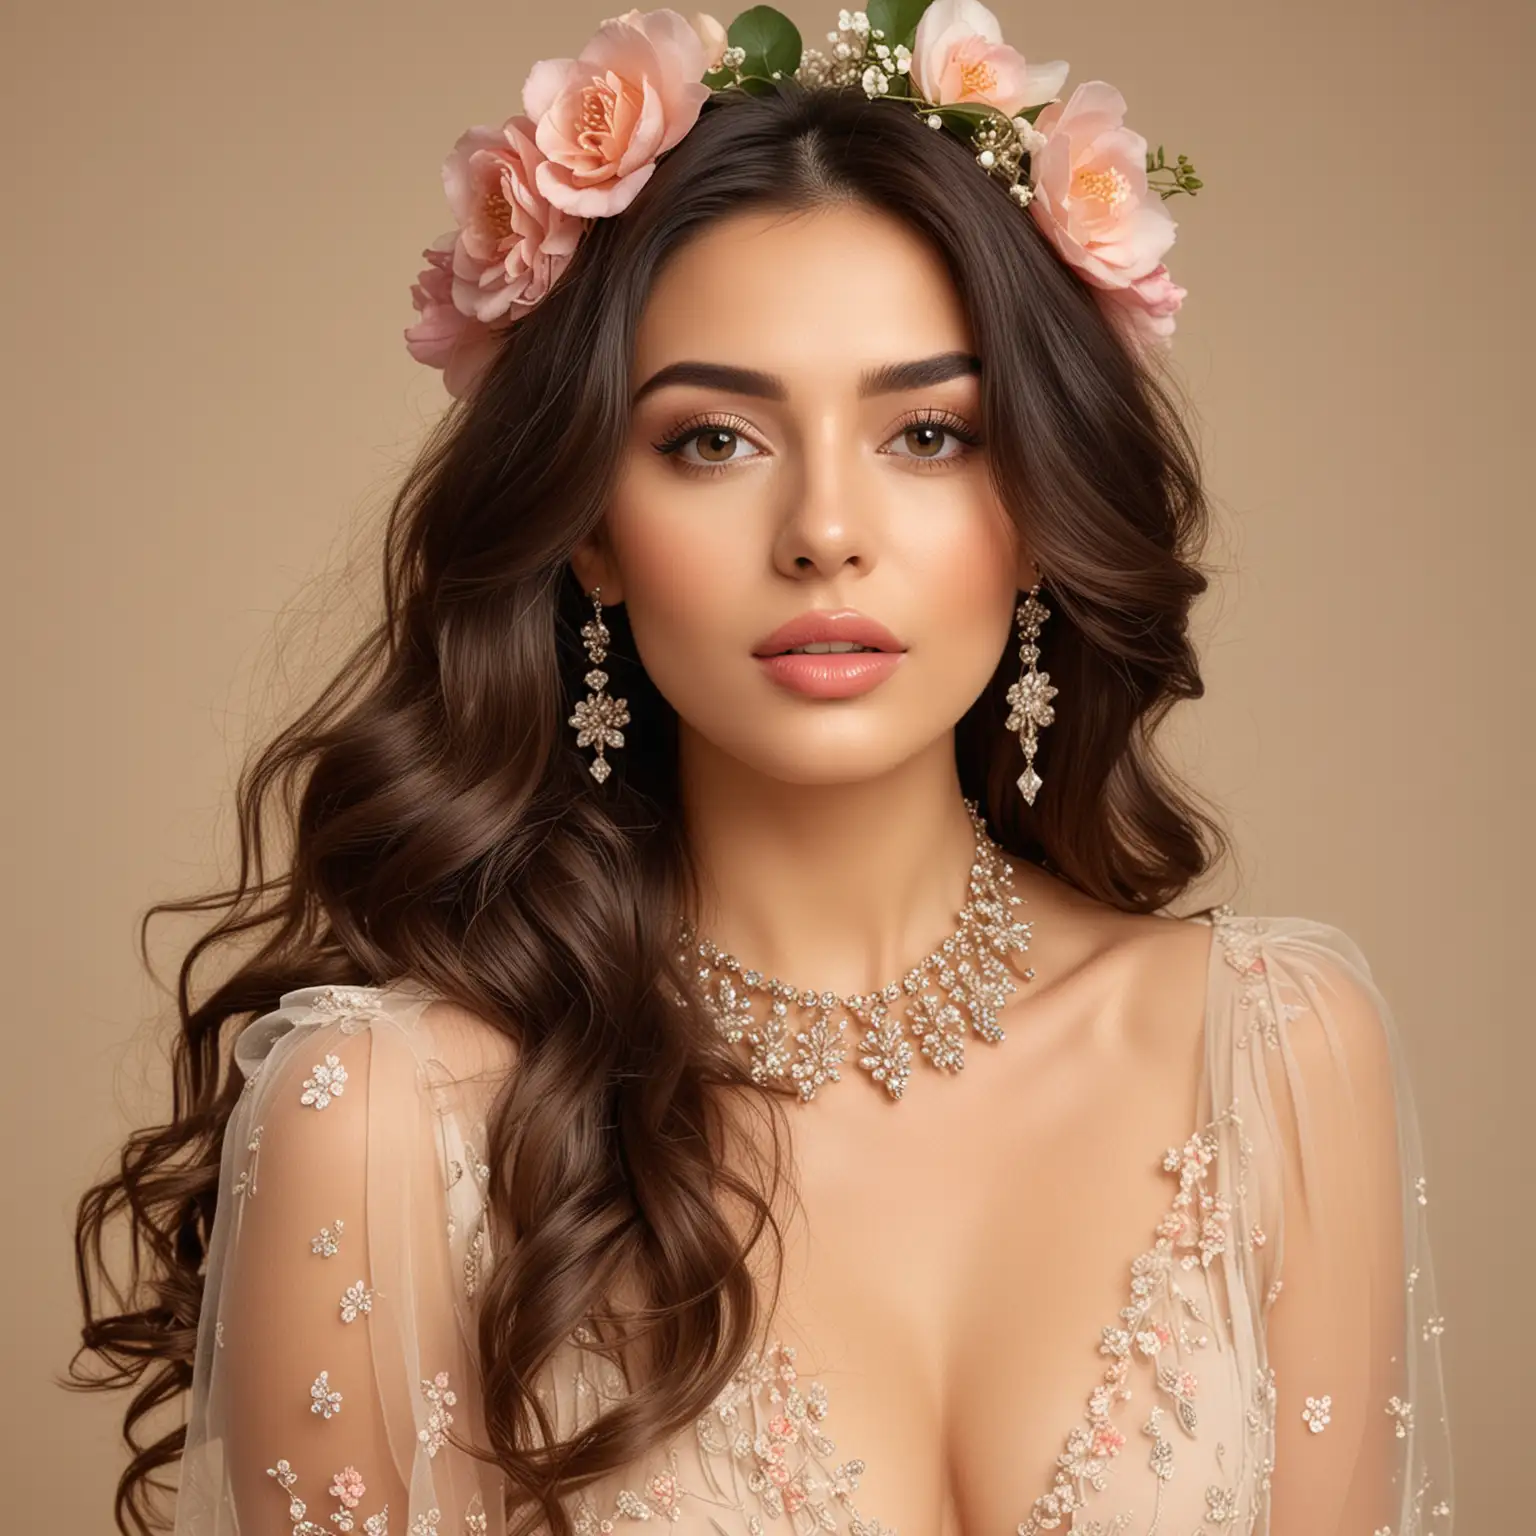 Elegant Woman in Sheer Blouse with Floral Accessories